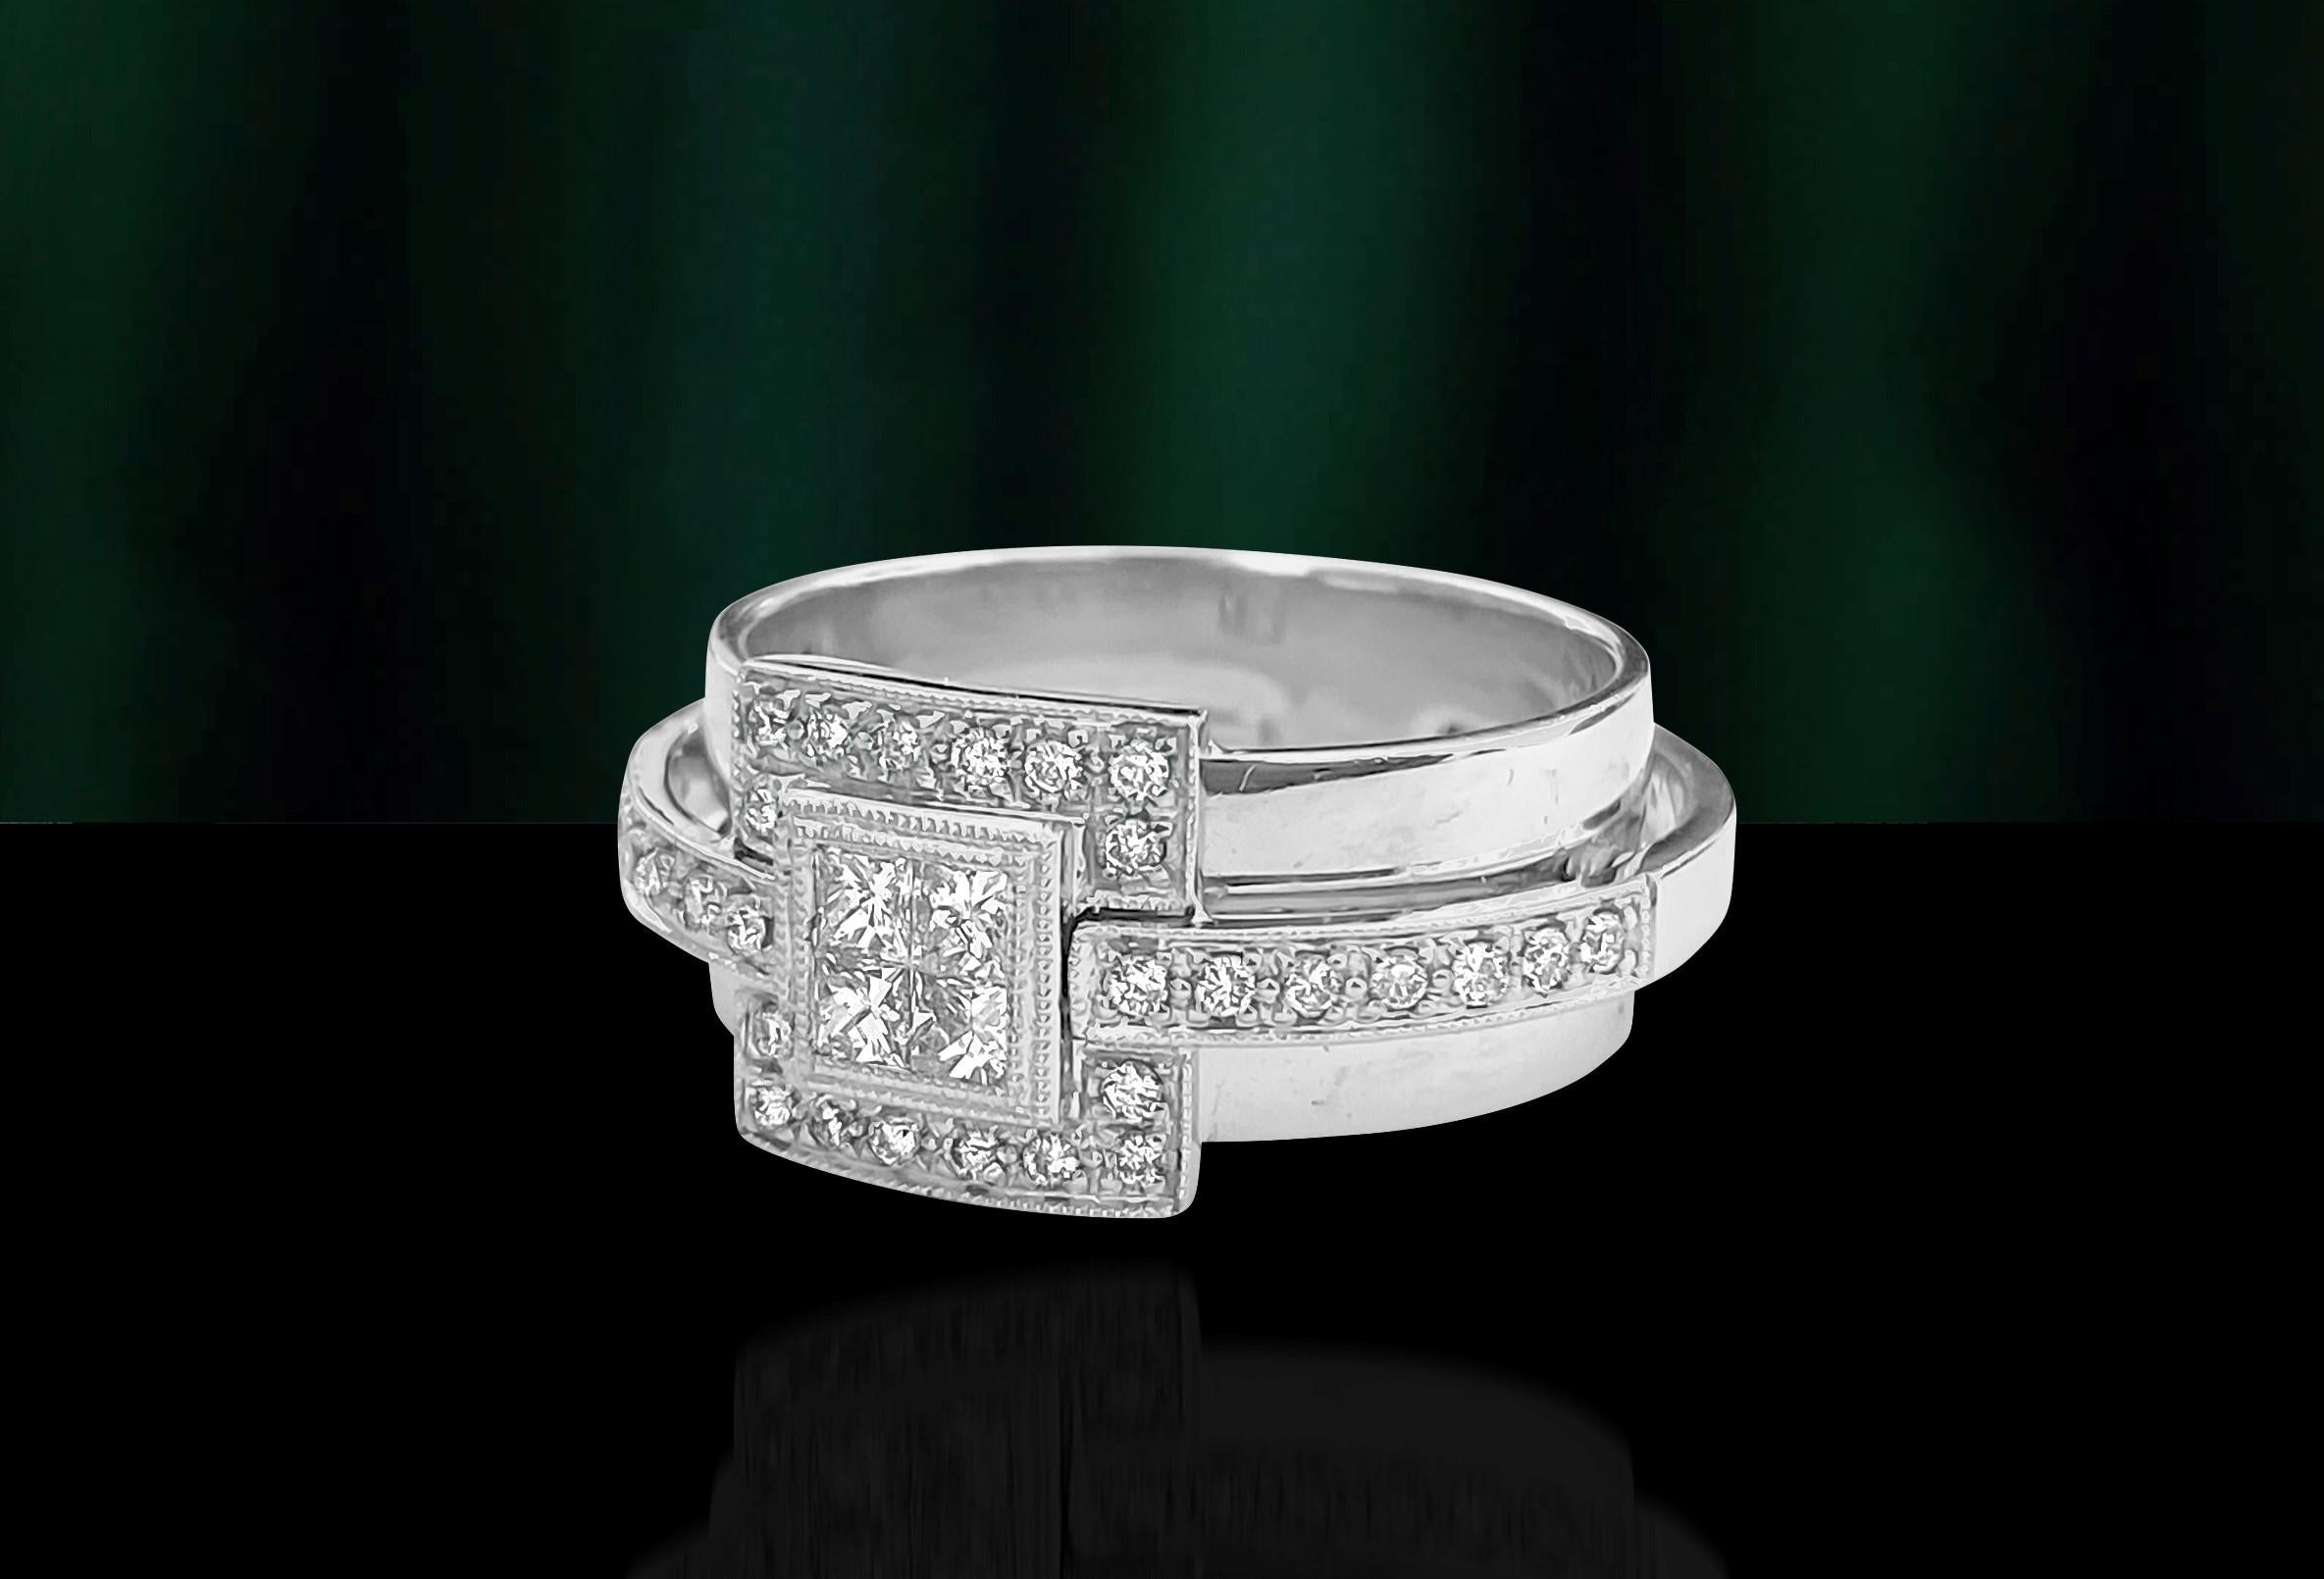 Metal: 14K white gold. 
Diamonds: 1.00ct total. Princess cut and round brilliant cut. VS2 clarity and G color. 100% natural earth mined diamonds. Hallmarks: 14k, 585. 
This is a unique diamond ring as 2 separate bands were soldered in to 1.